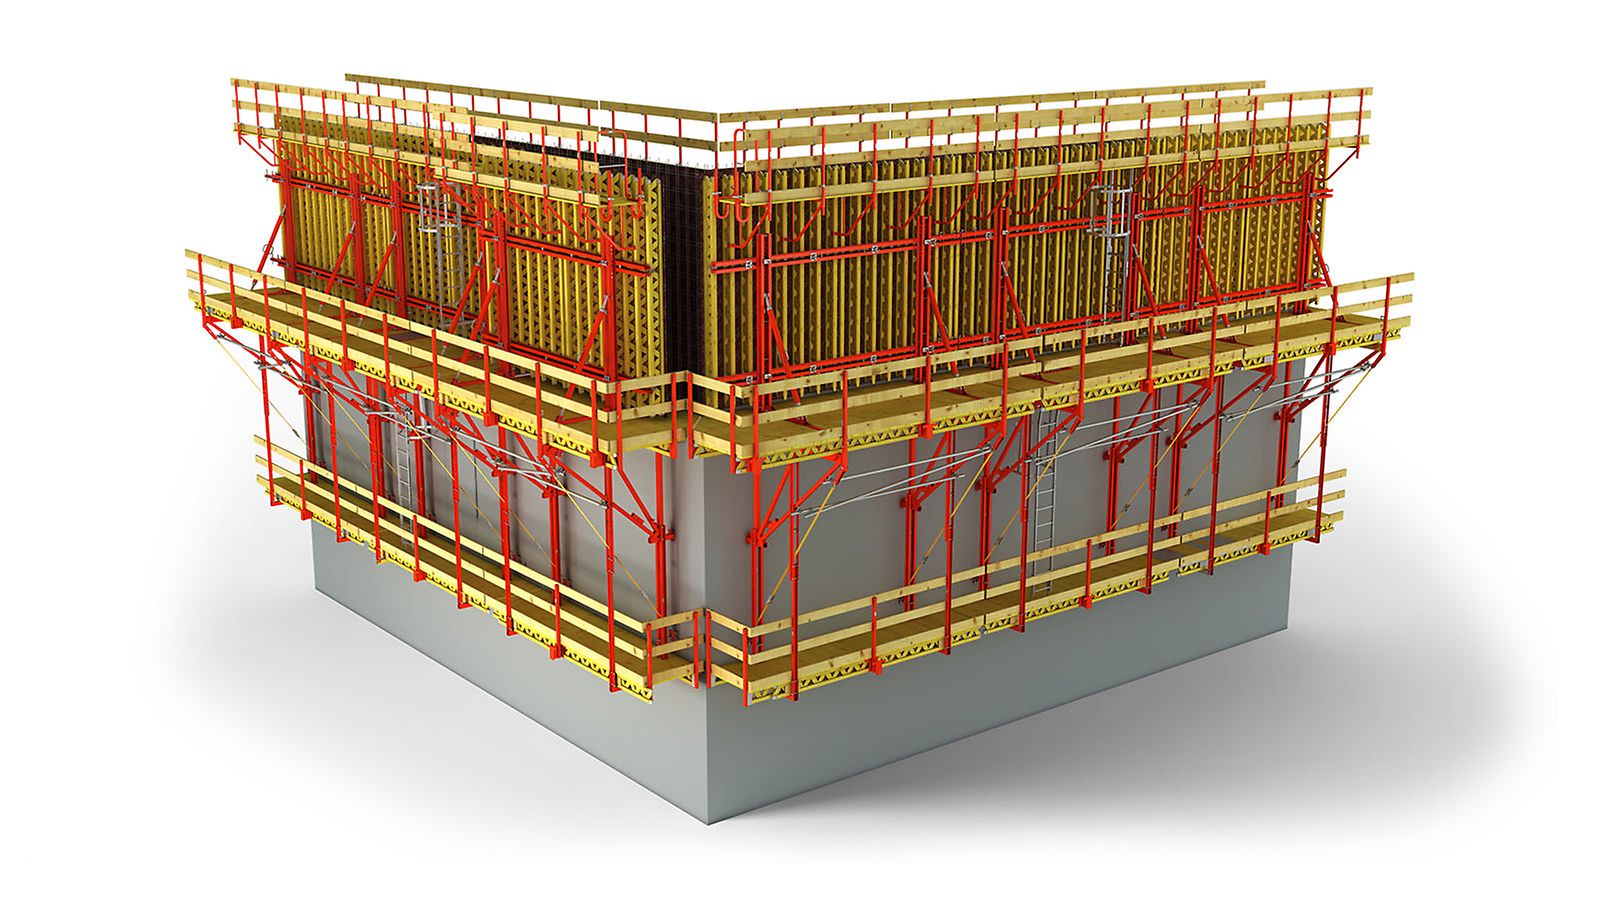 The cantilever system ensures the safety of work with formwork at any height